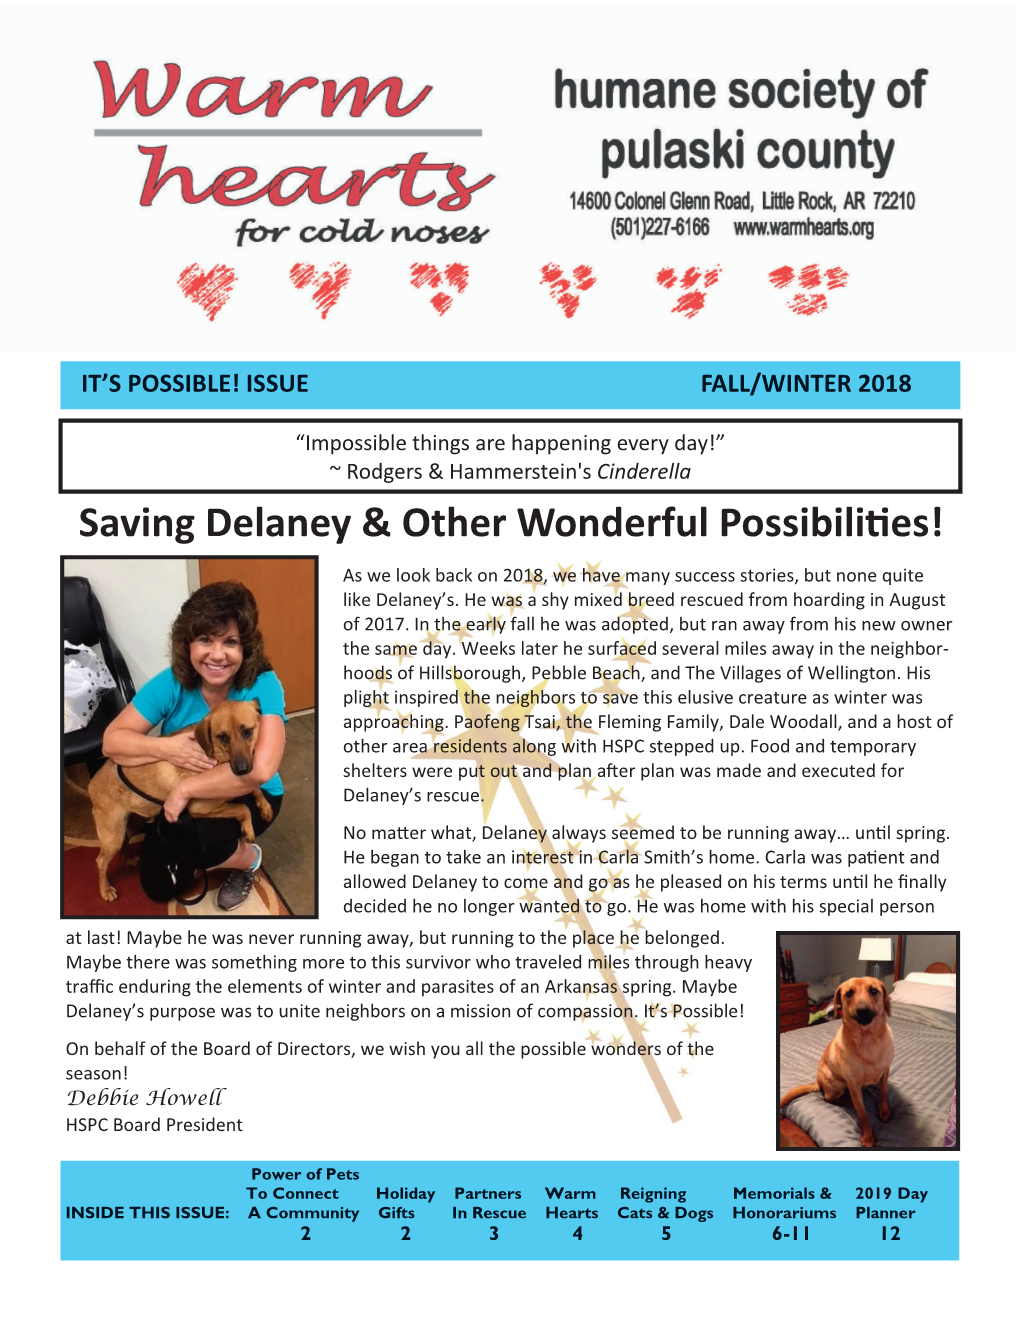 Saving Delaney & Other Wonderful Possibilies!